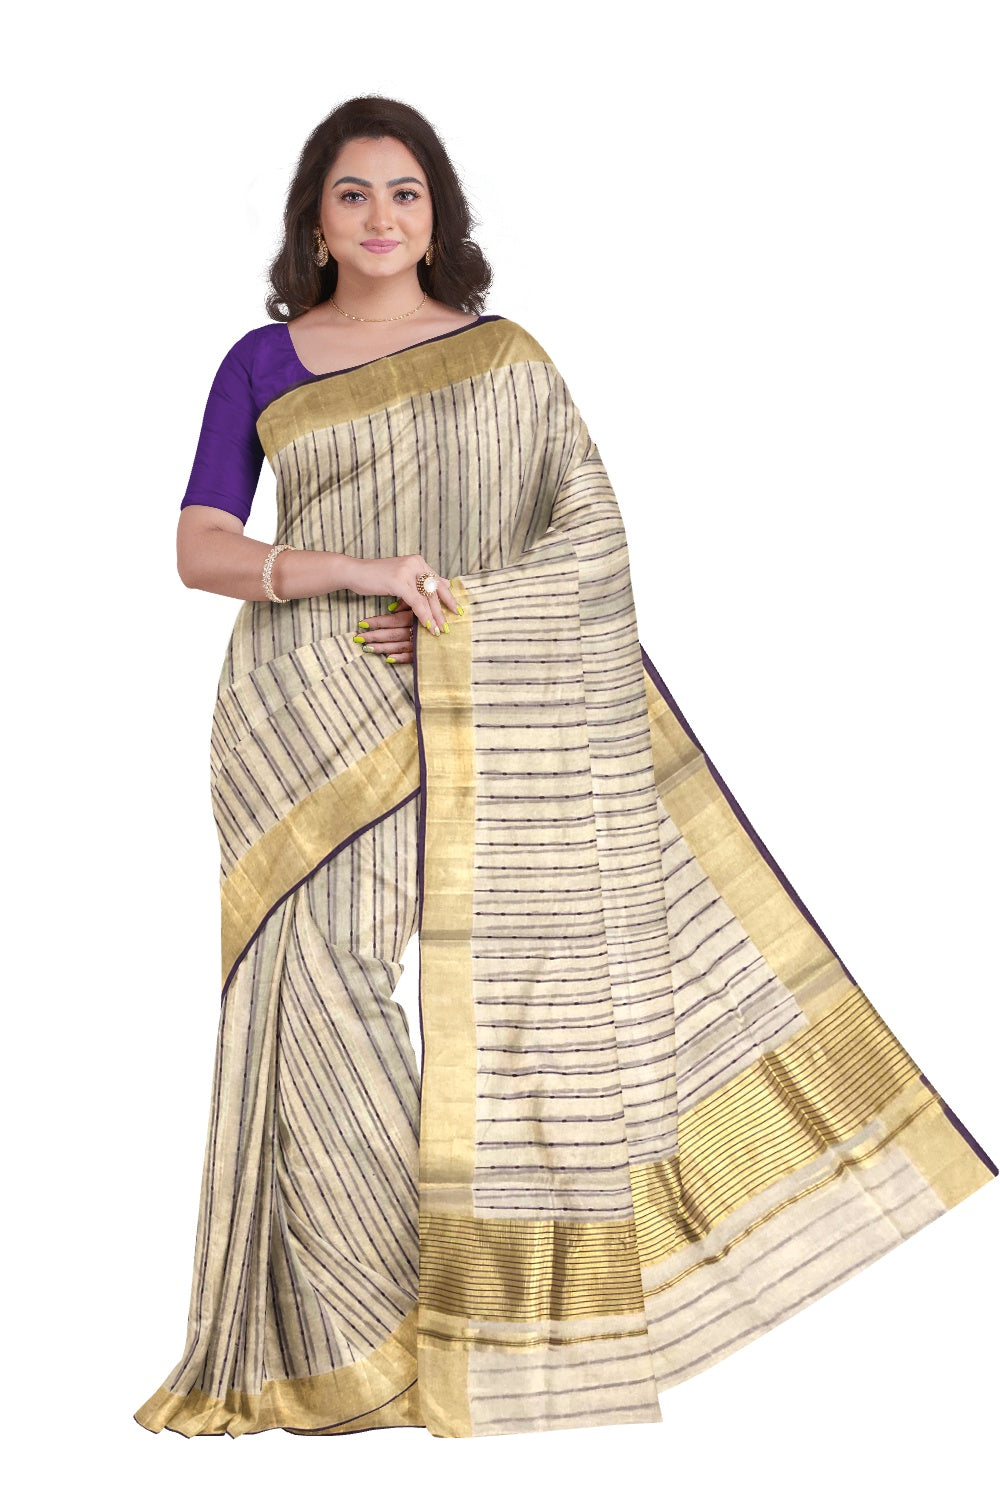 Southloom Kuthampully Handloom Tissue Saree with Kasavu and Violet Stripes Body